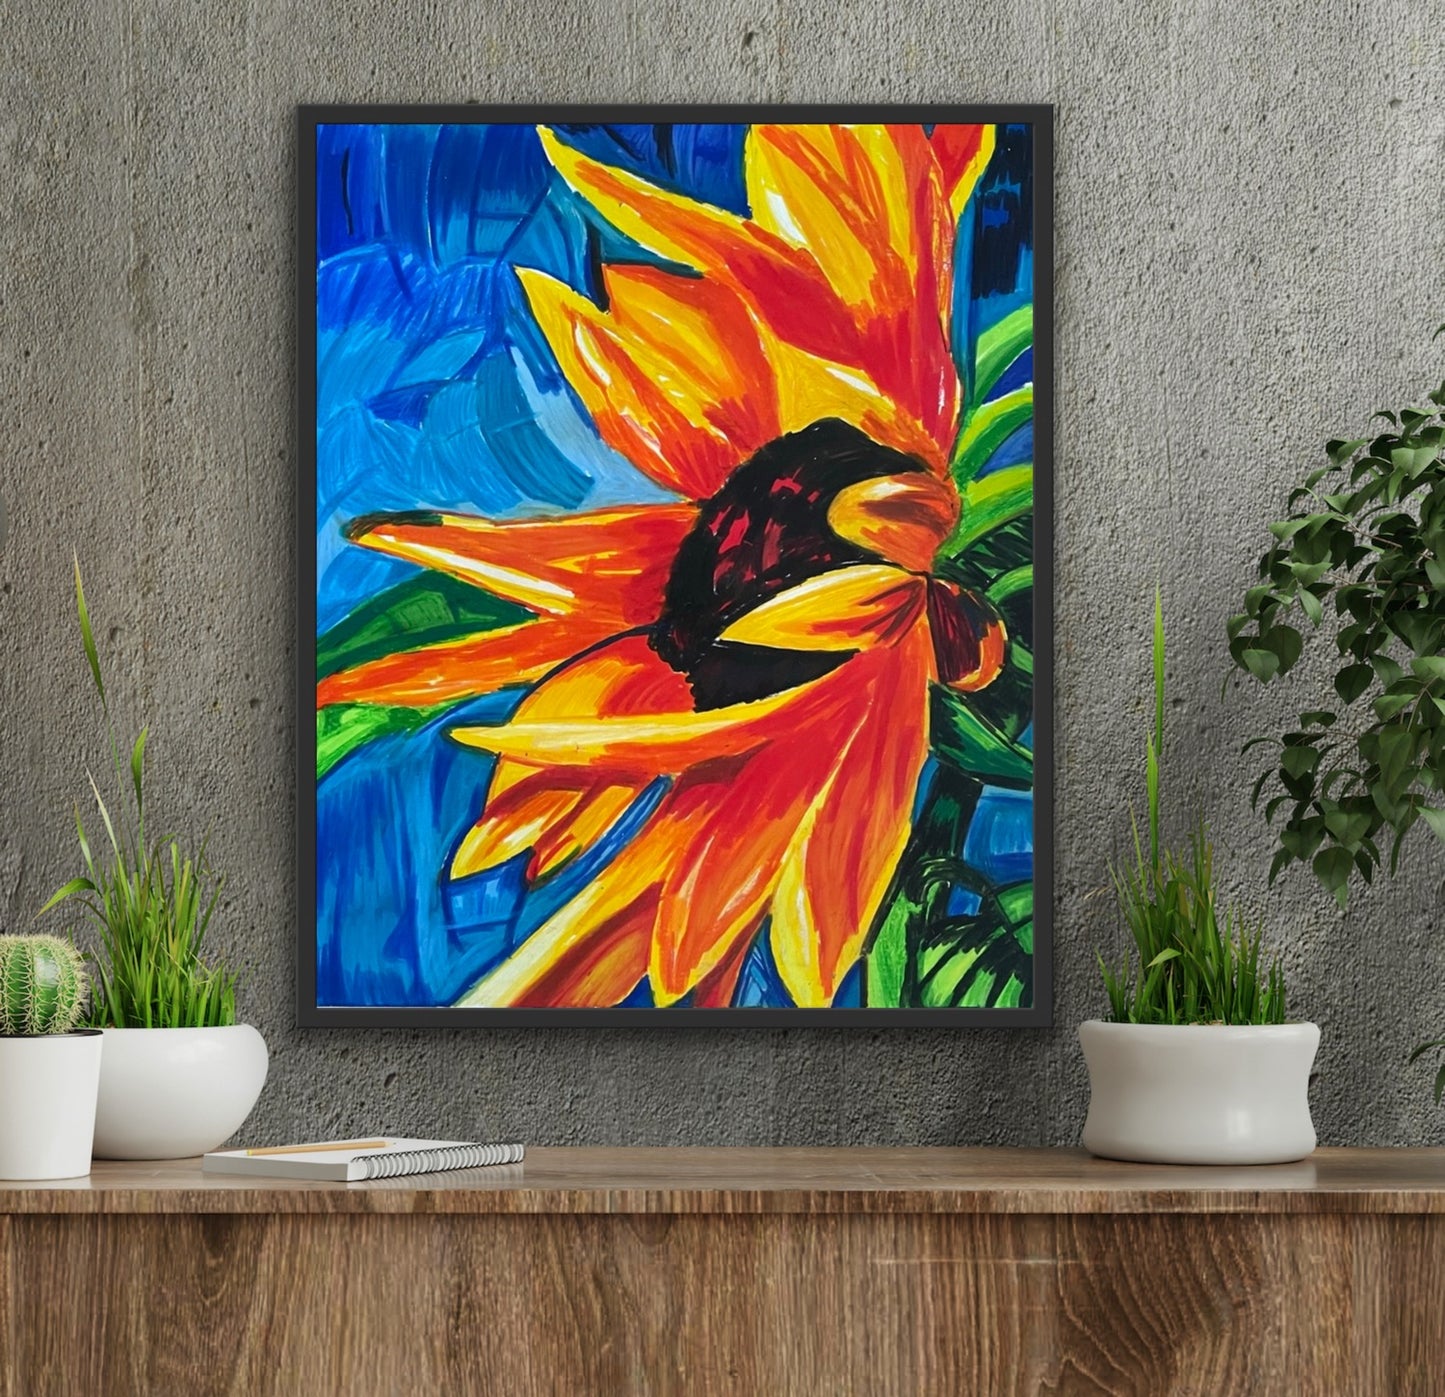 Sunflower my love - fine prints and canvas prints in more sizes